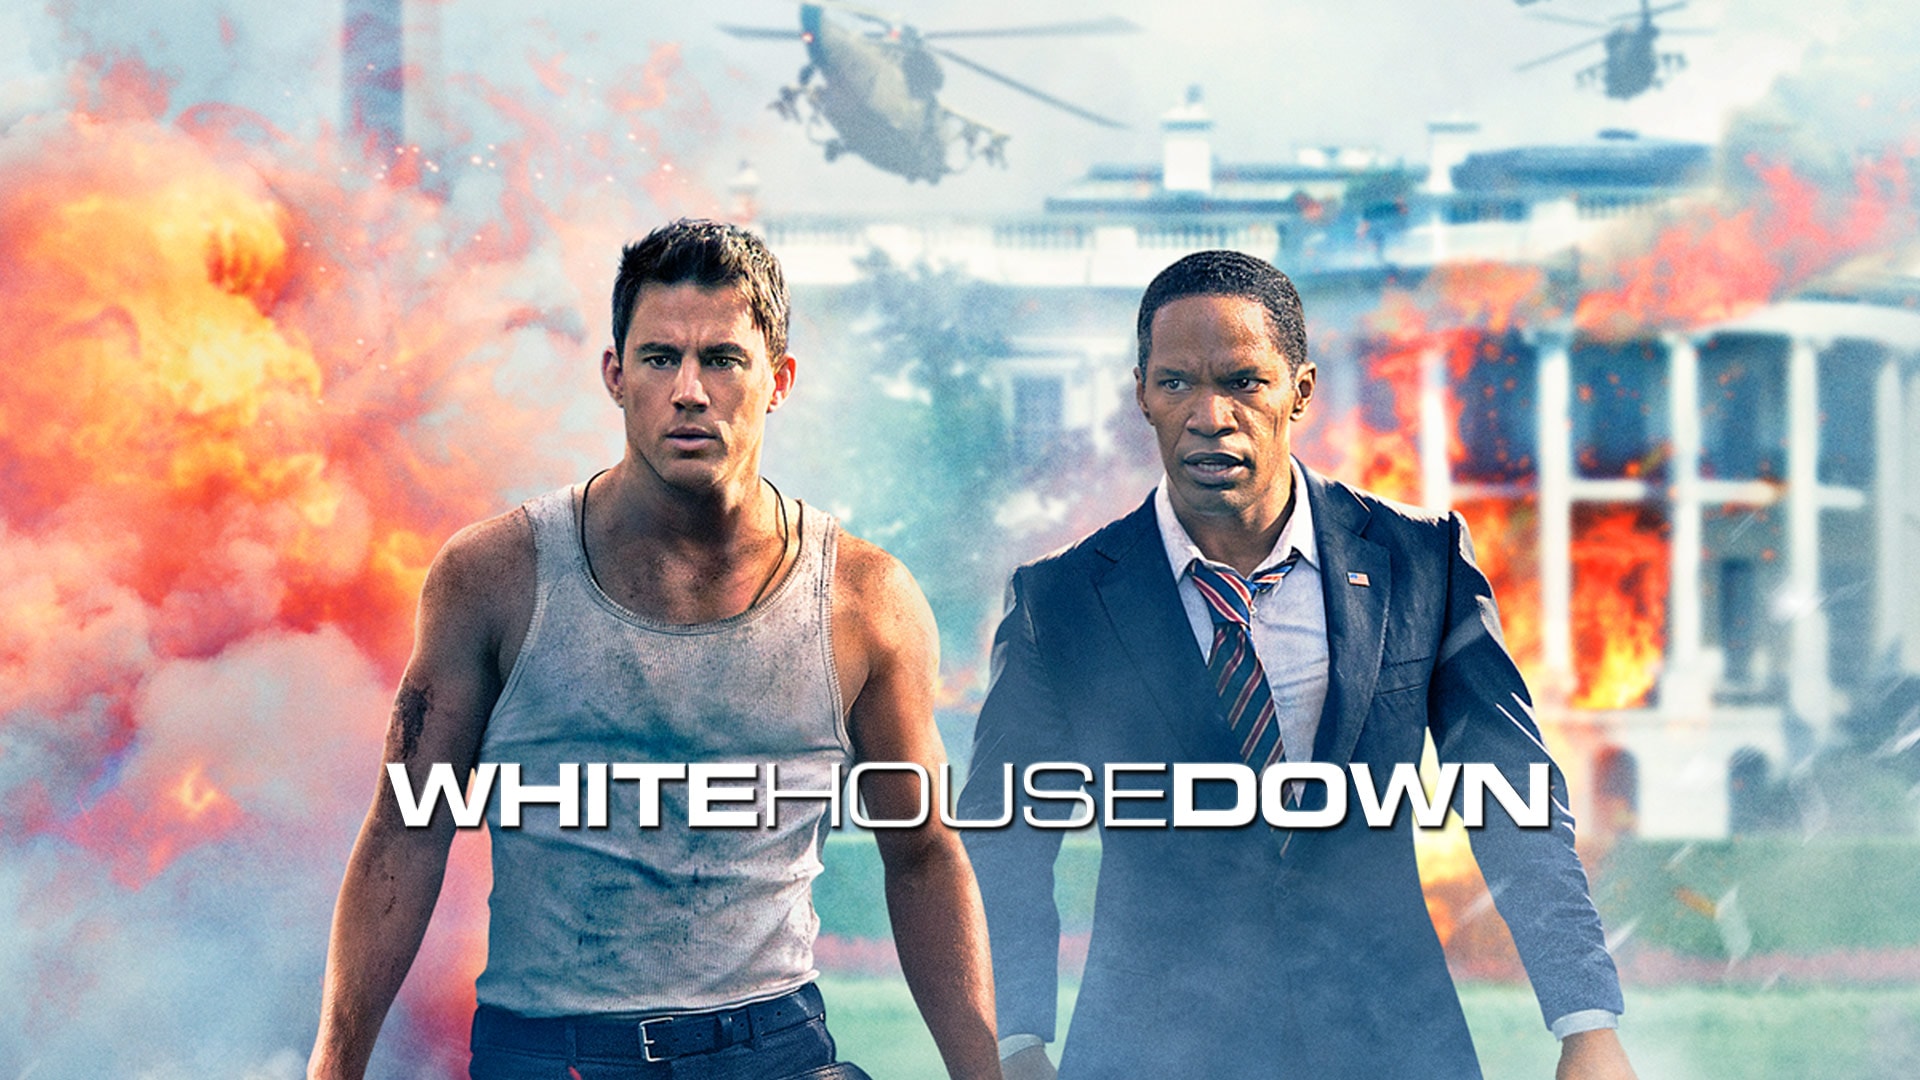 Watch White House Down Online | Stream Full Movies